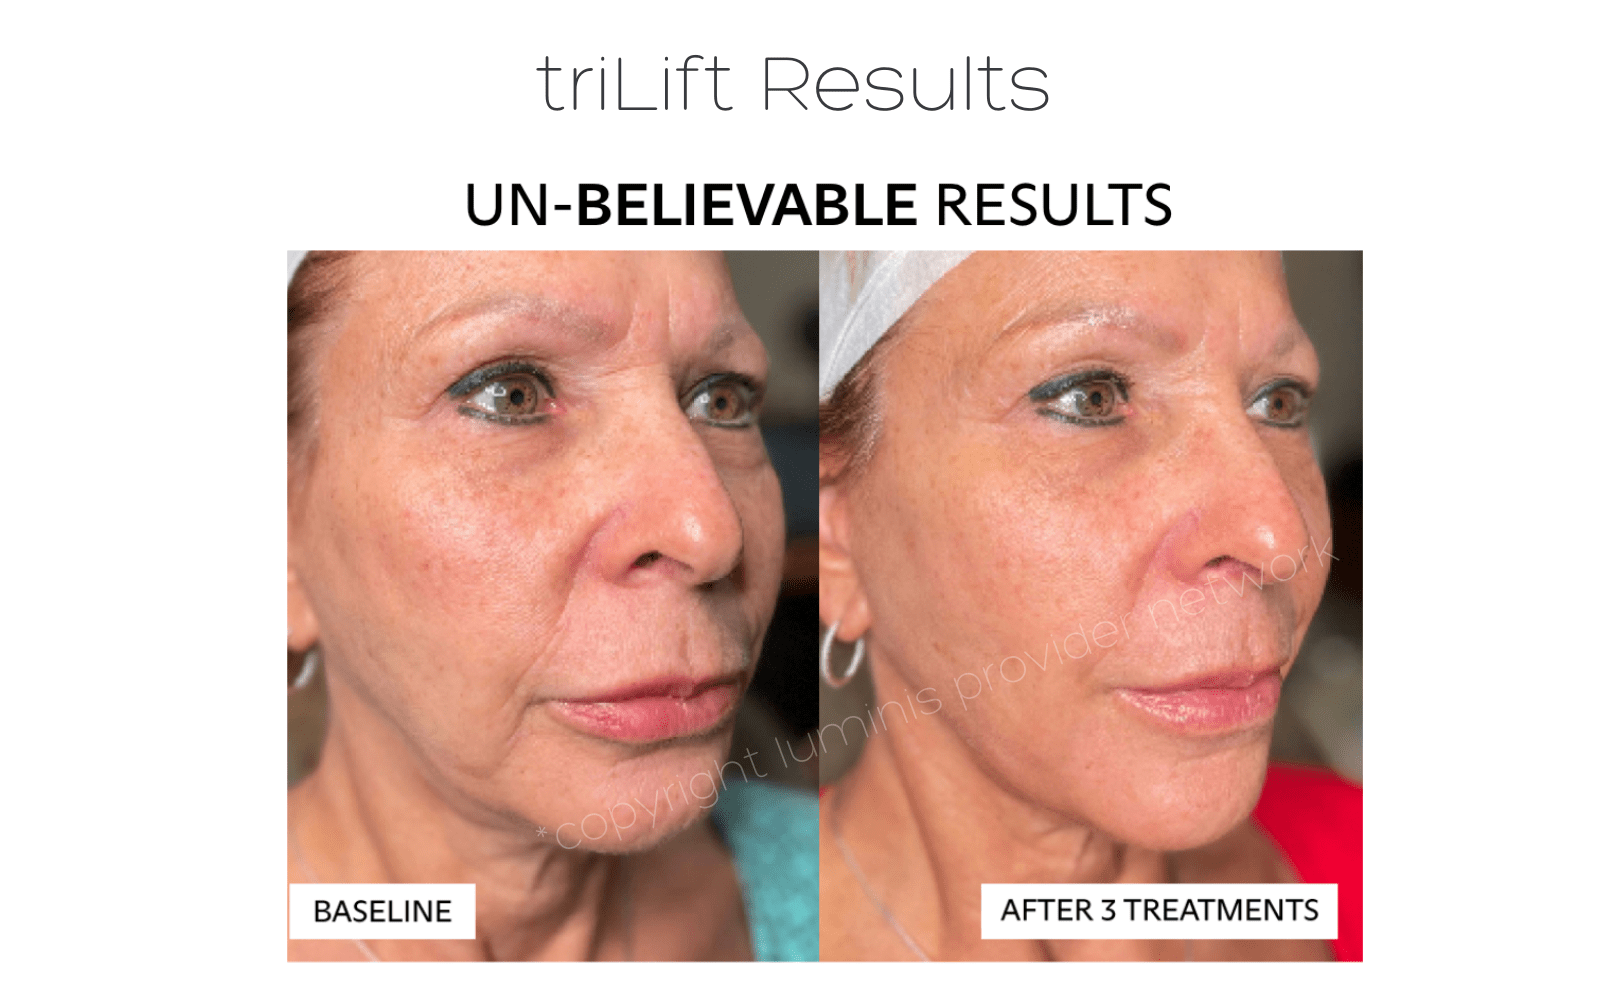 triLift results before and after three treatments for facial sagging